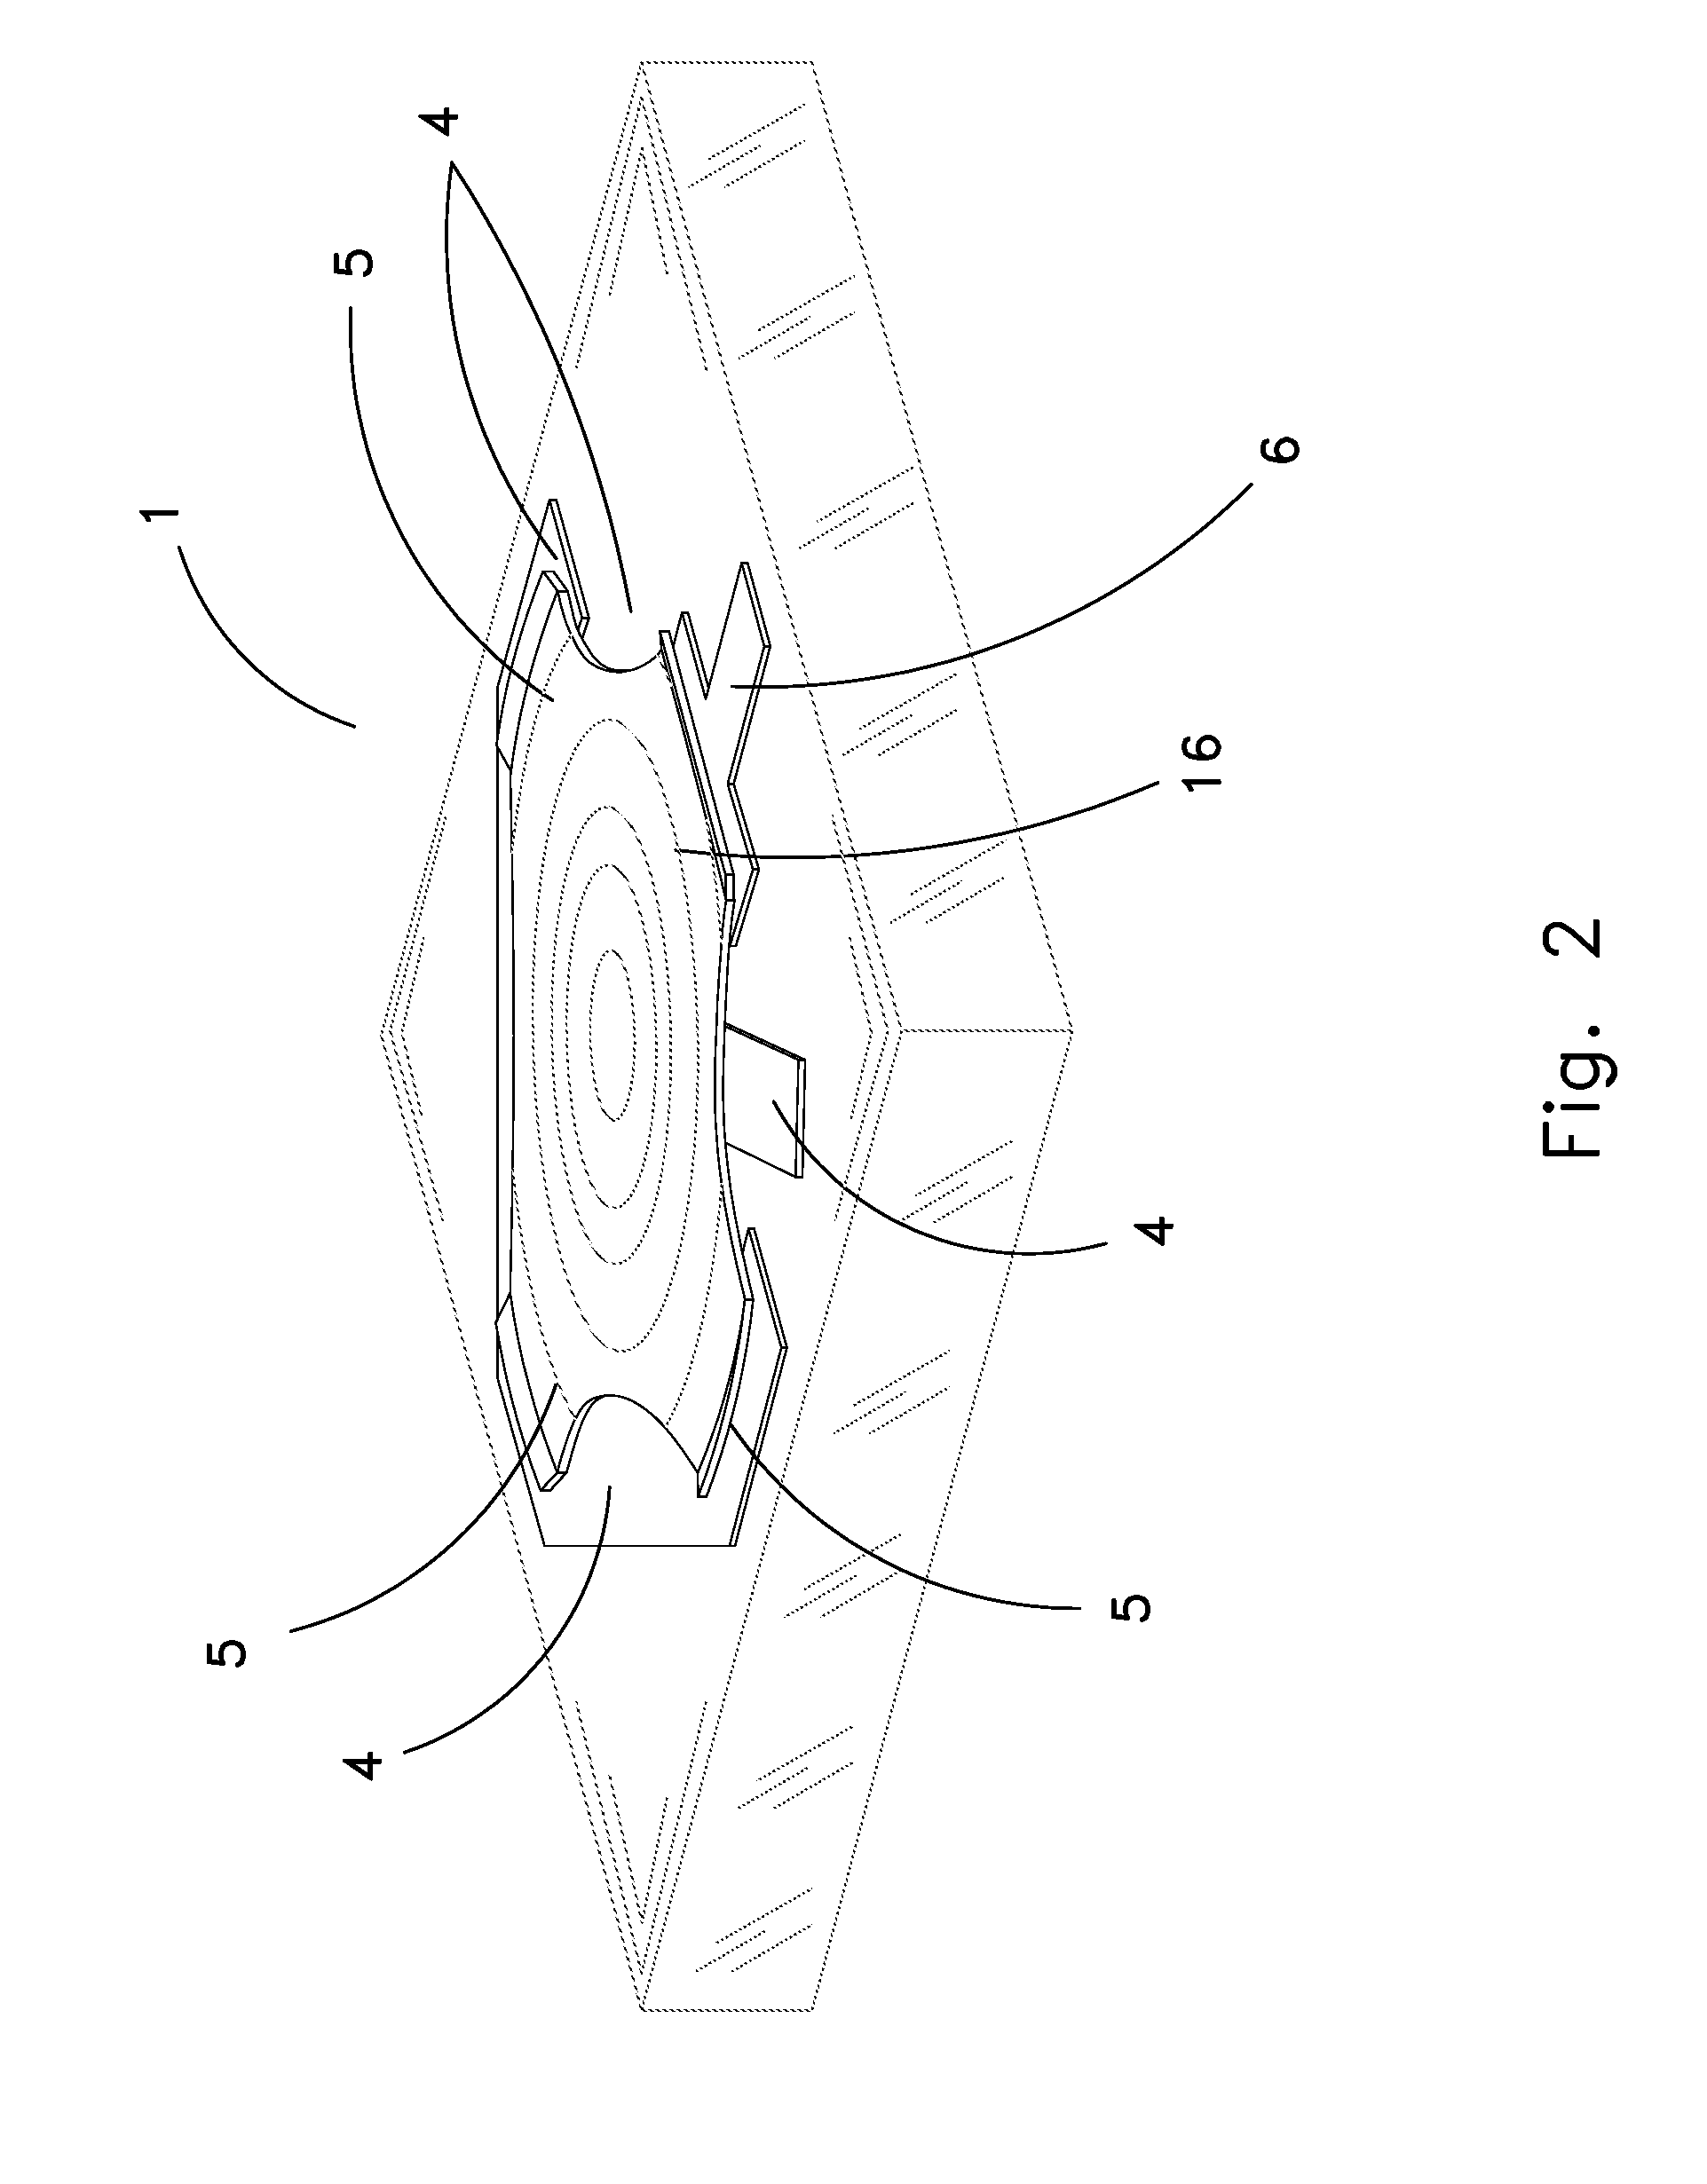 Electrical switch apparatus and methods